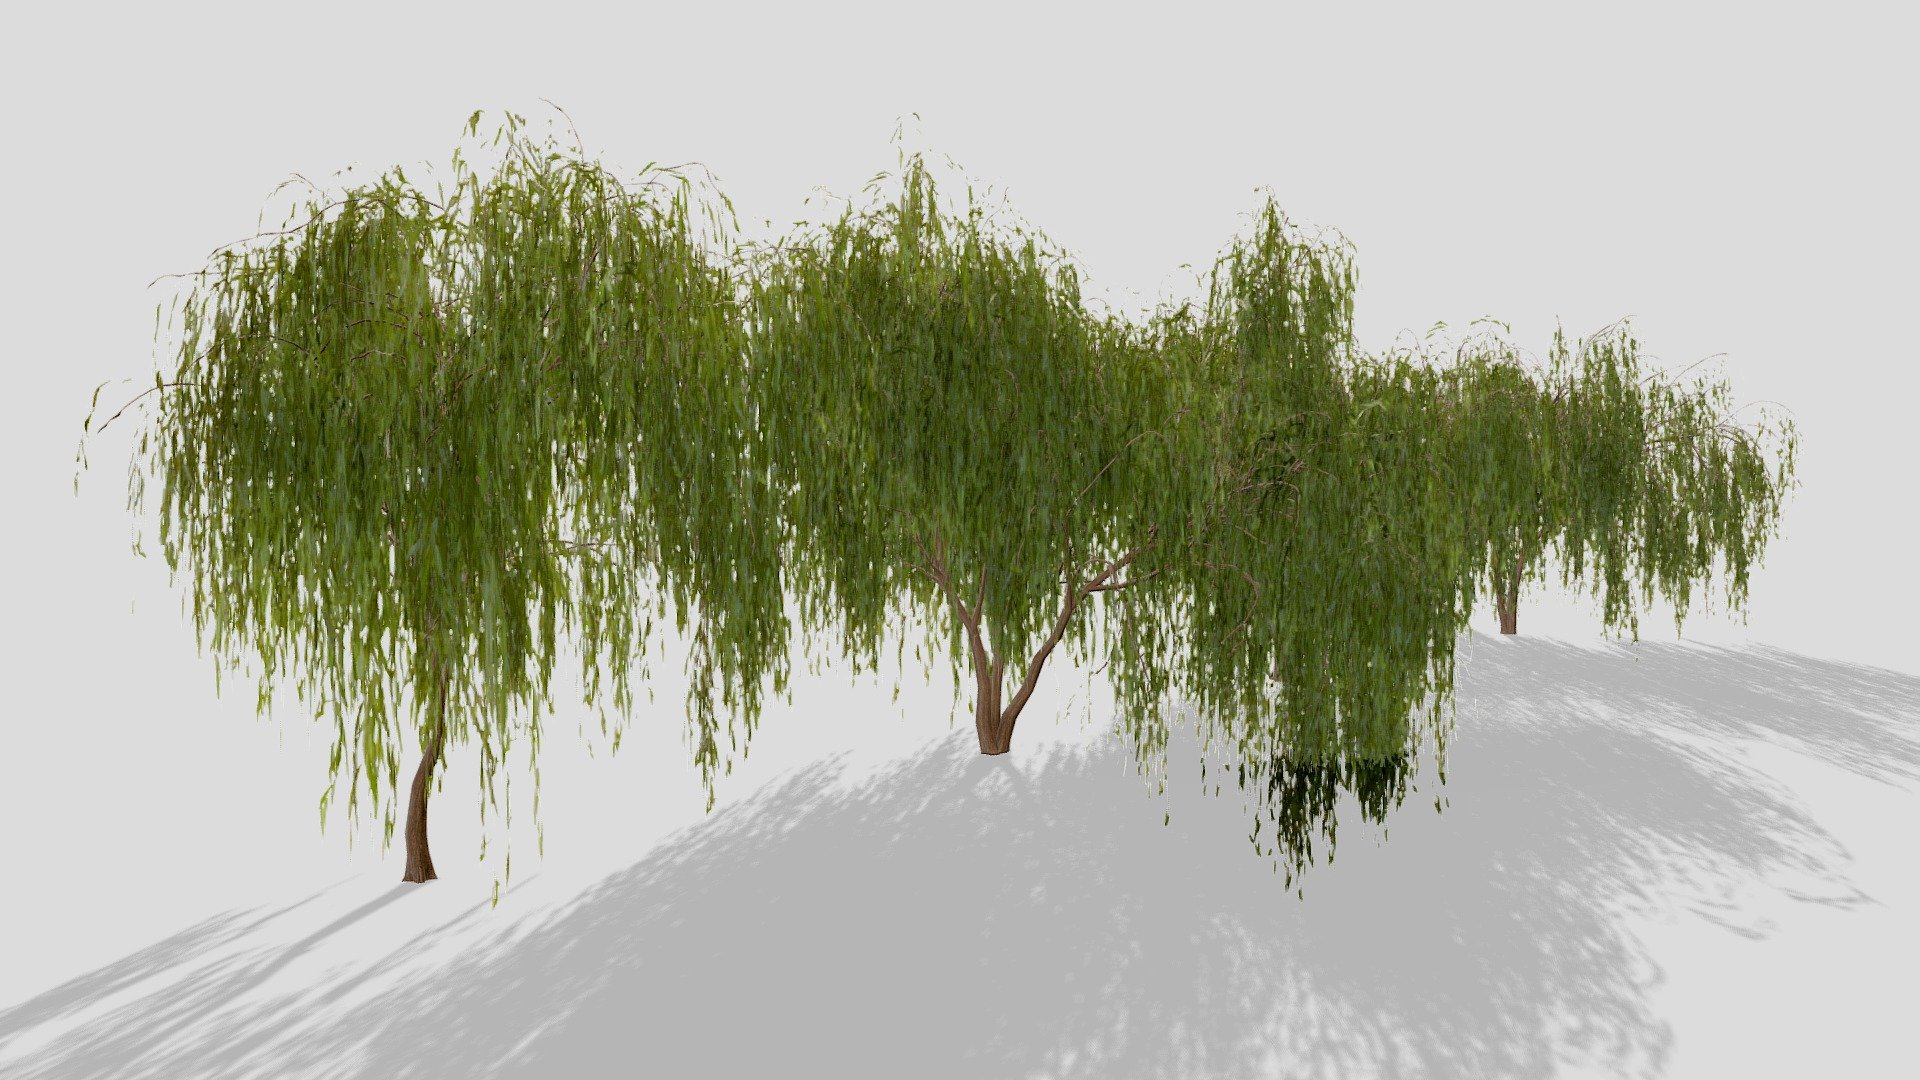 Set of willow trees which have been setup to use with ue4.
Examples of my foliage and real time work can be seen here: https://www.artstation.com/leonlabyk - Willow Trees - 3D model by Studio Lab (@studiolab.dev) 3d model